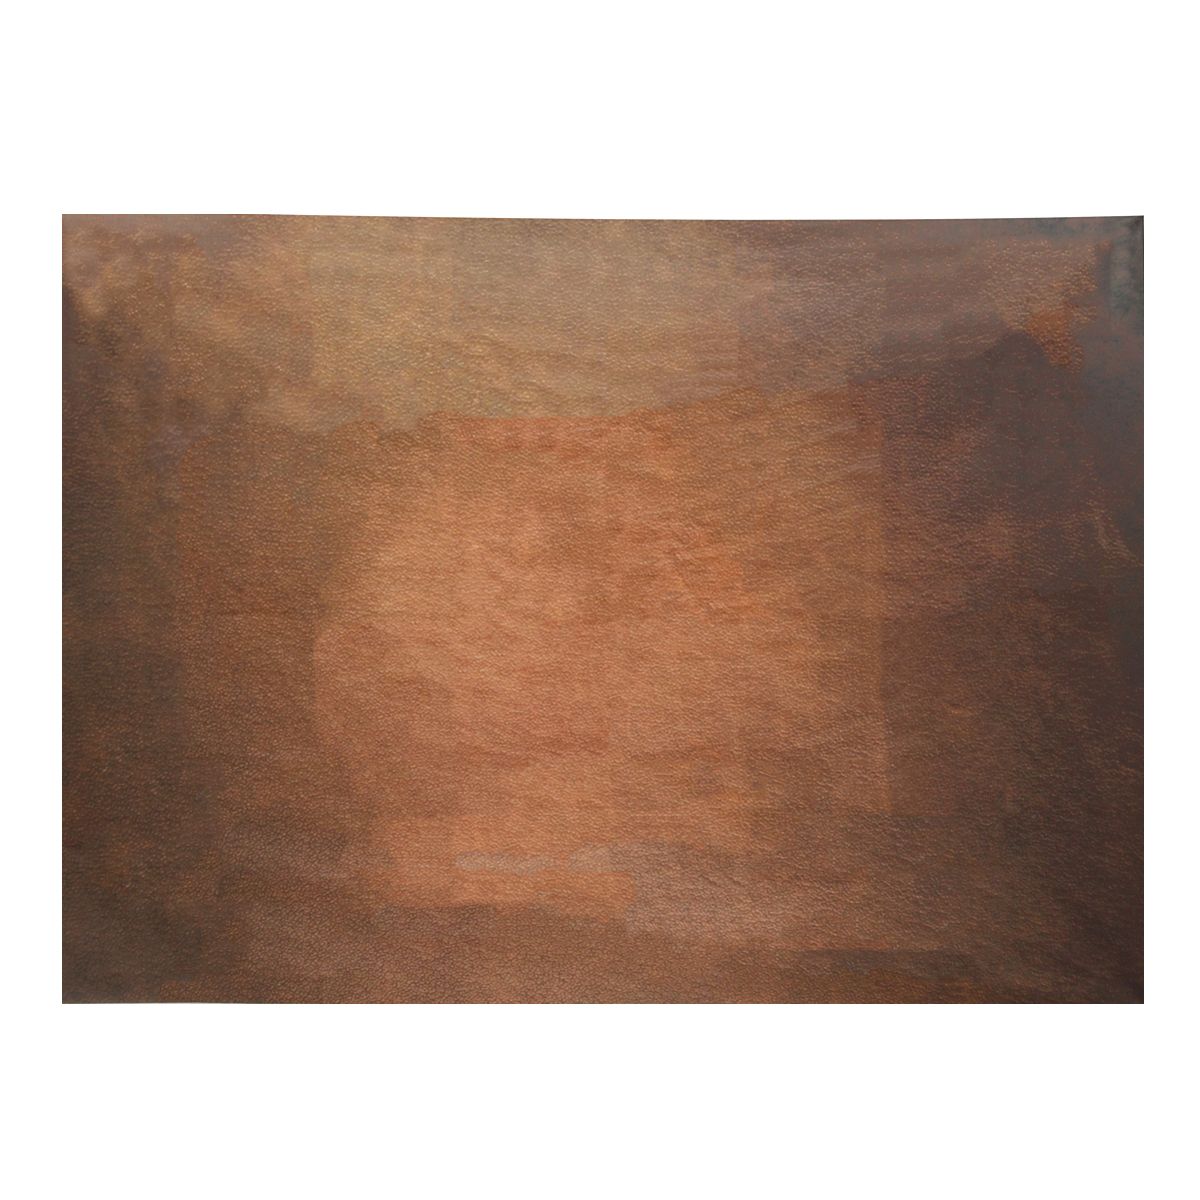 7x5FT-Brown-Pure-Color-Photography-Backdrop-Studio-Prop-Background-1392178